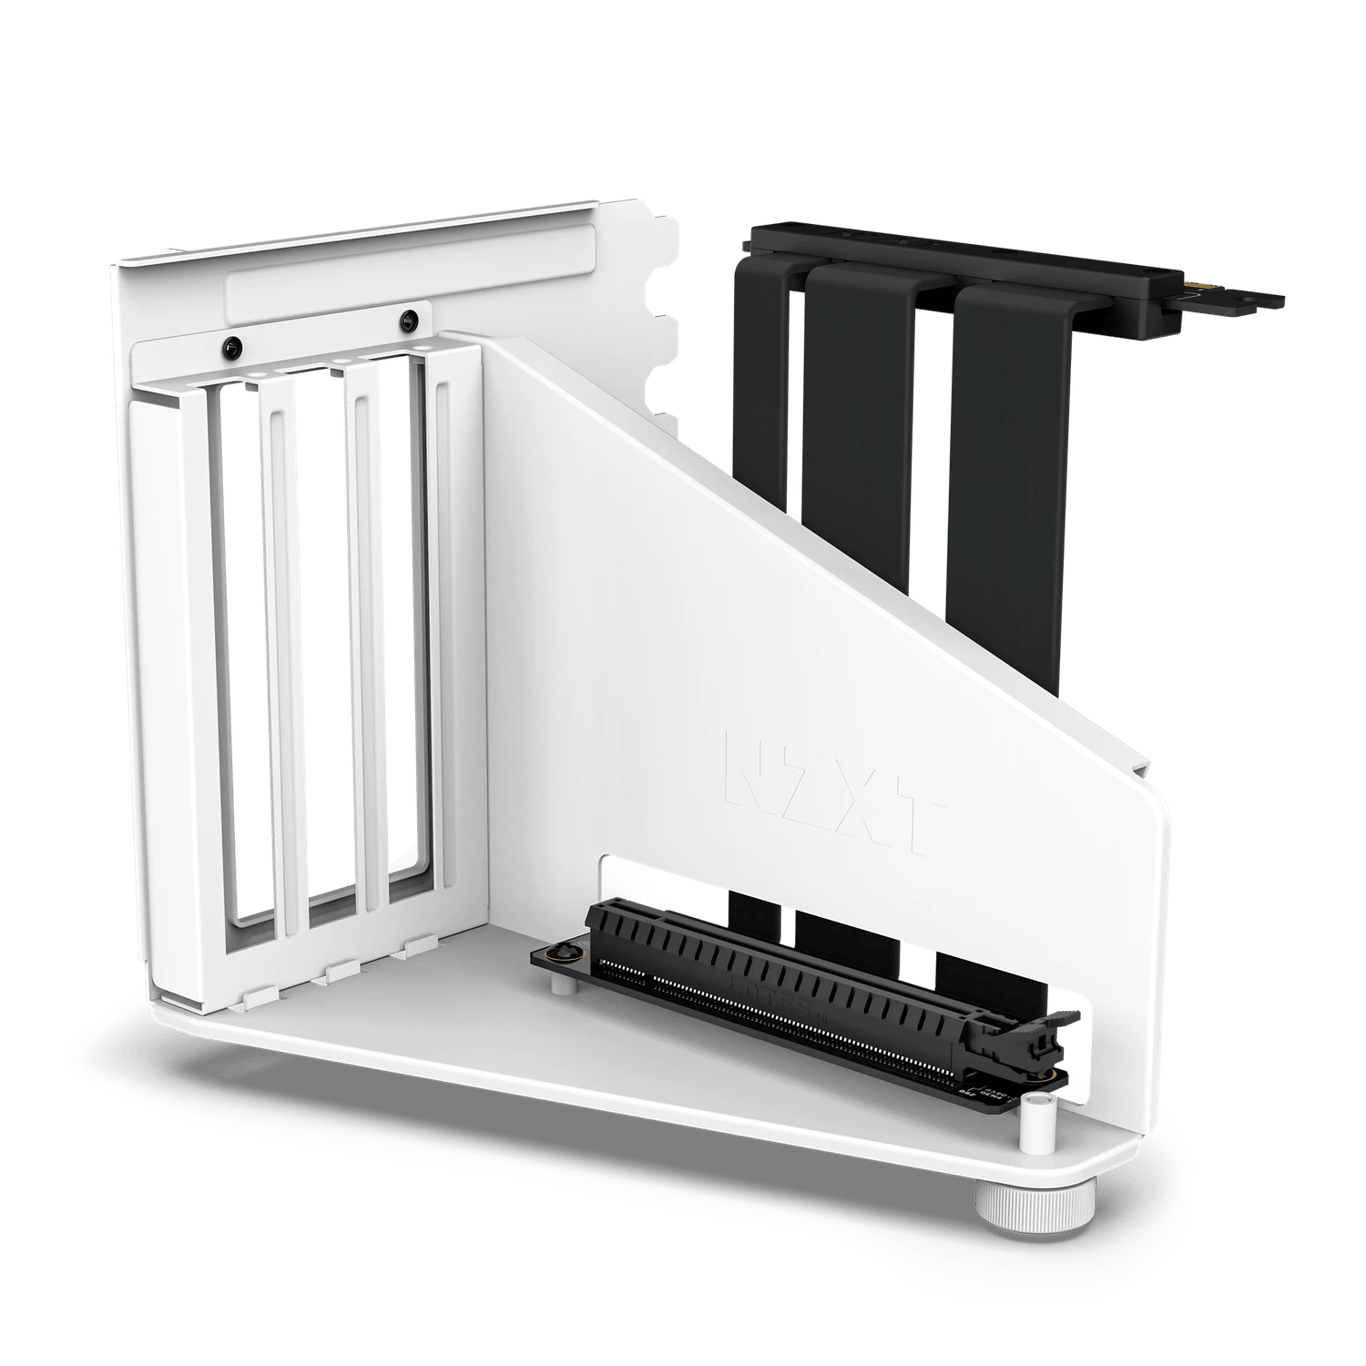 NZXT Vertical GPU Mounting Kit (PCIe 4.0 Riser cable) -   ()